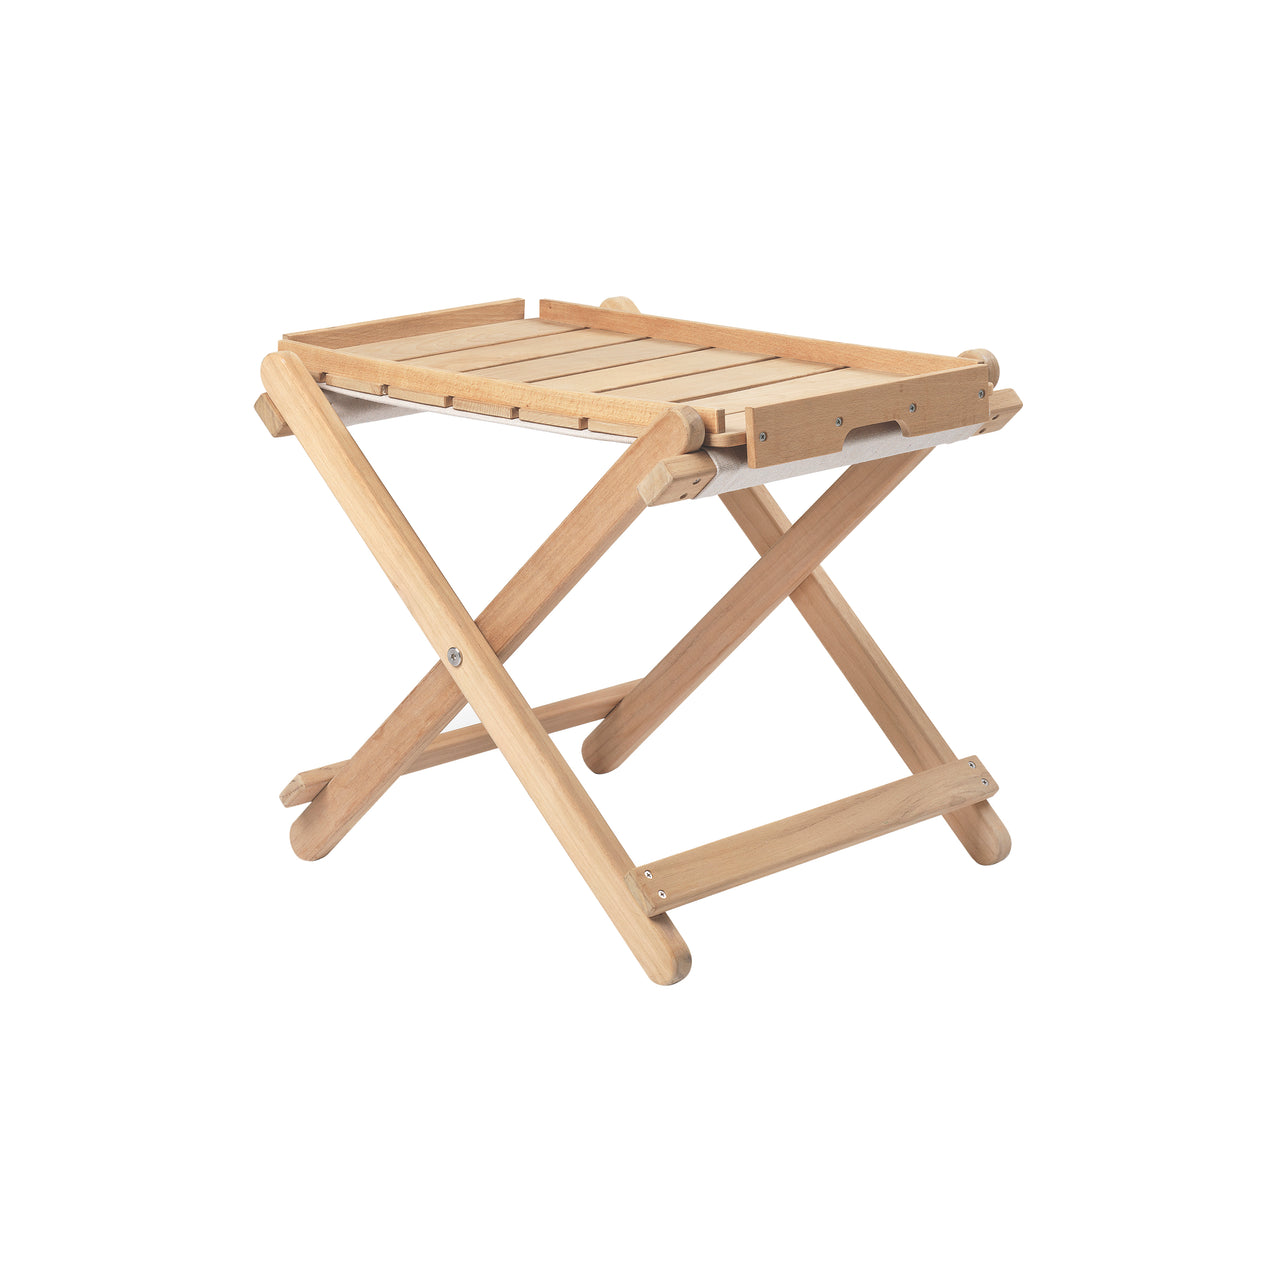 BM5768 Deck Chair Footstool: Outdoor + With Tray